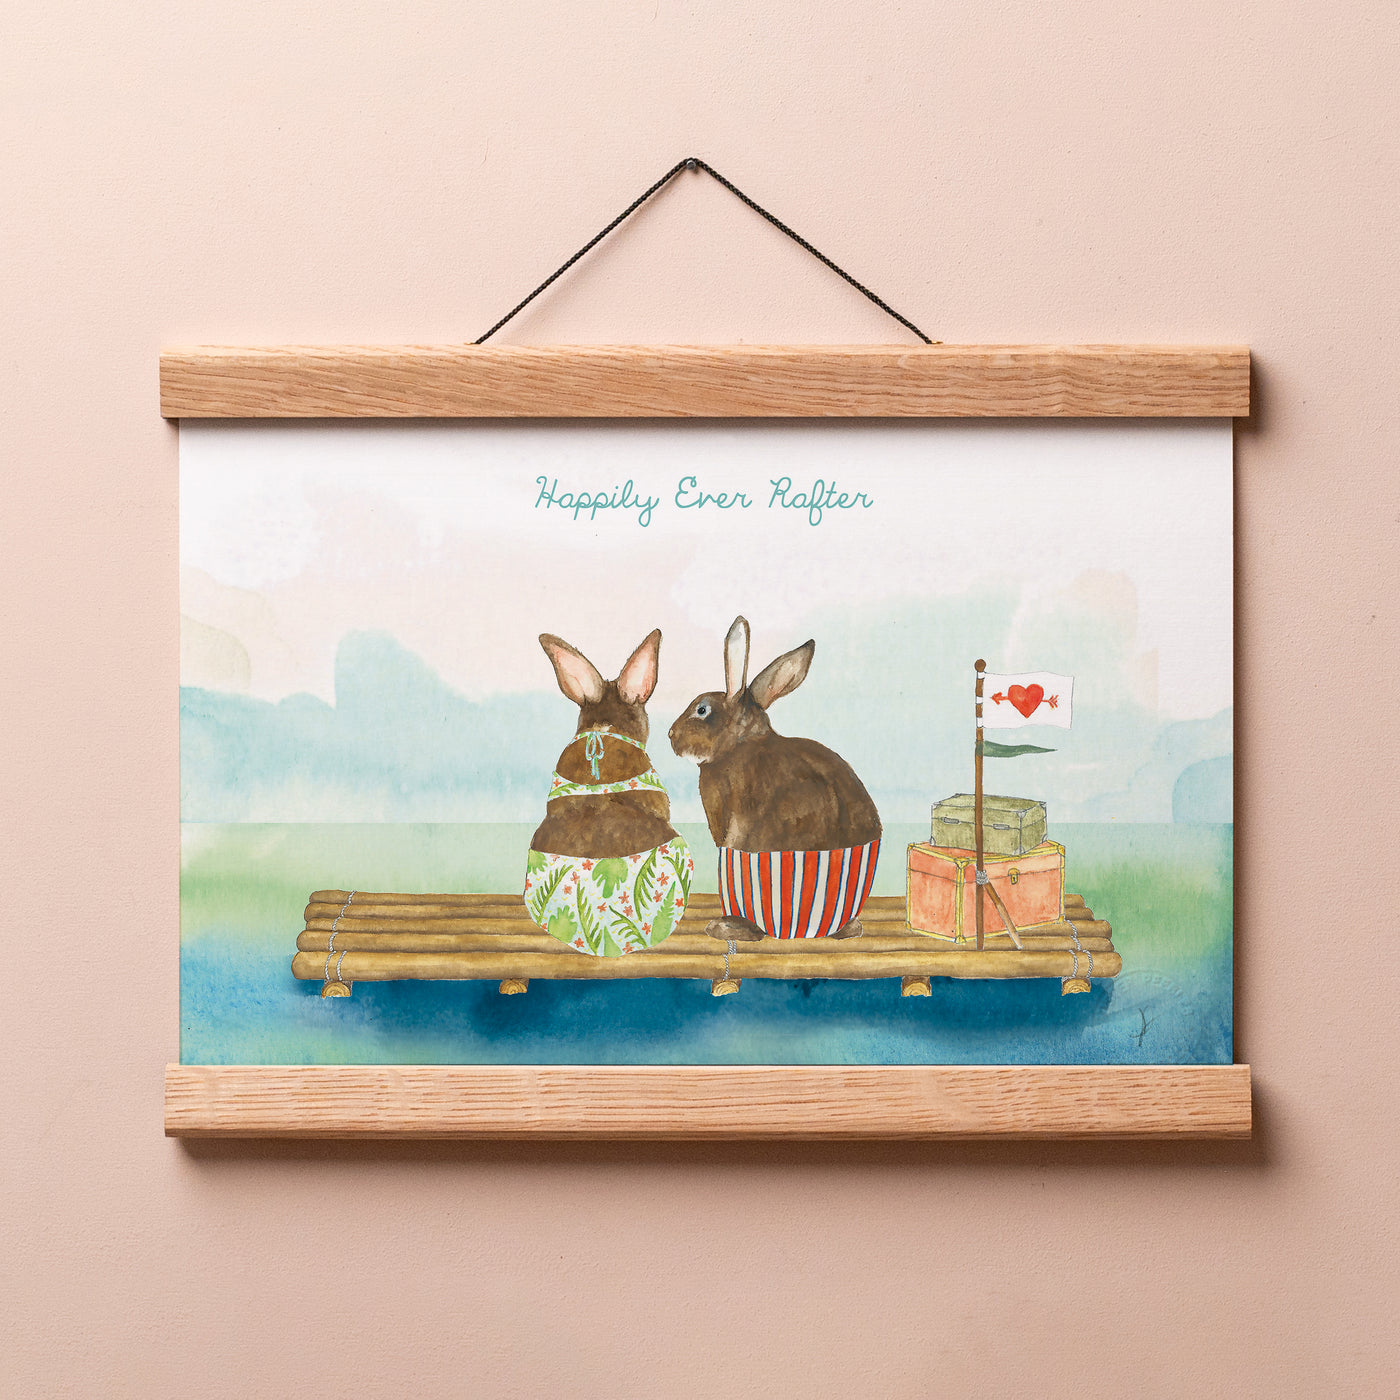 Happily Ever Rafter Print